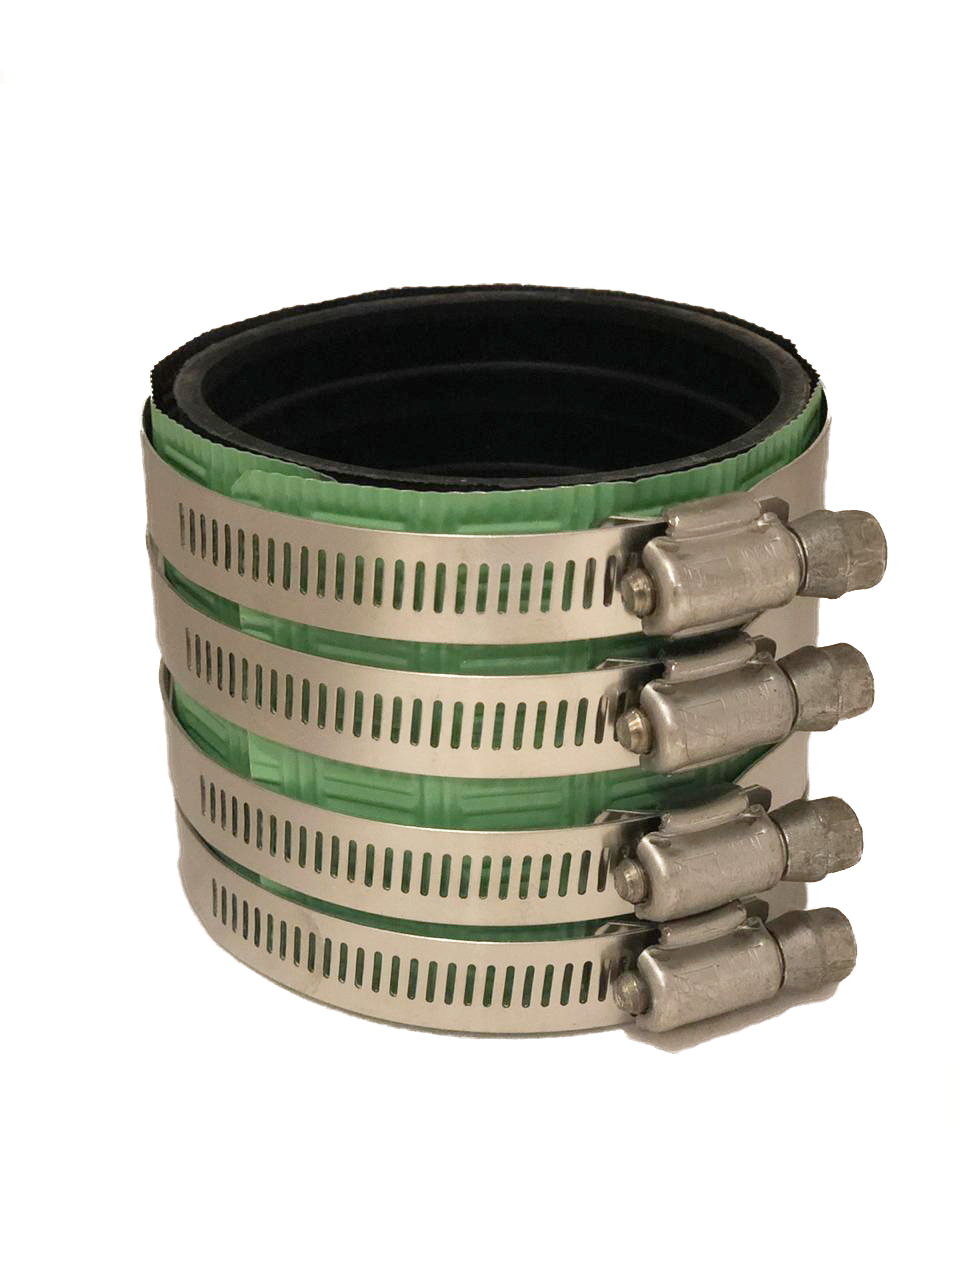 6219H8G 3&quot; - 4 BAND IDEAL
(GREEN) COUPLING {48} - 3/8&quot;
Hex-80 inch/lbs Installation 
(Adapts from PVC to IPEX)